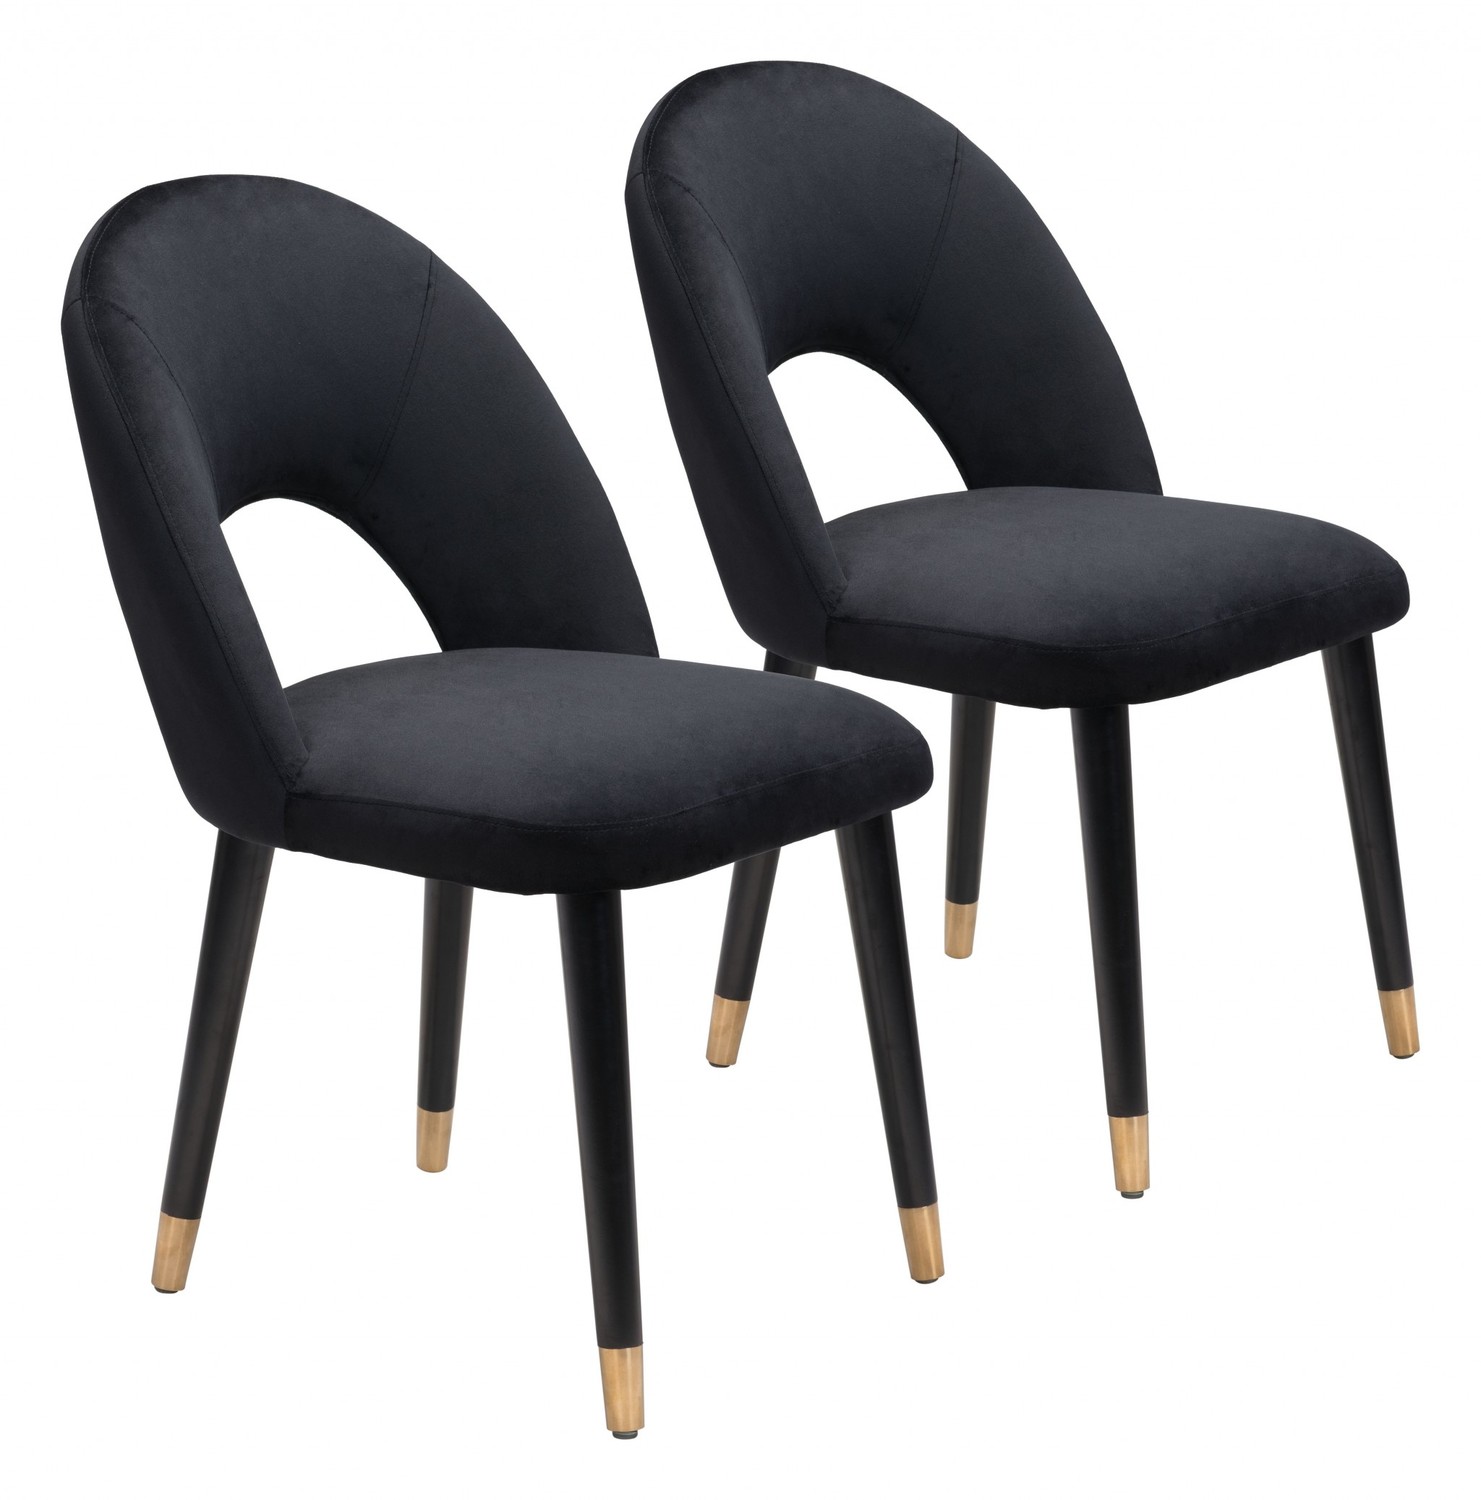 Set of Two Black Thick Loop Back Dining Chairs